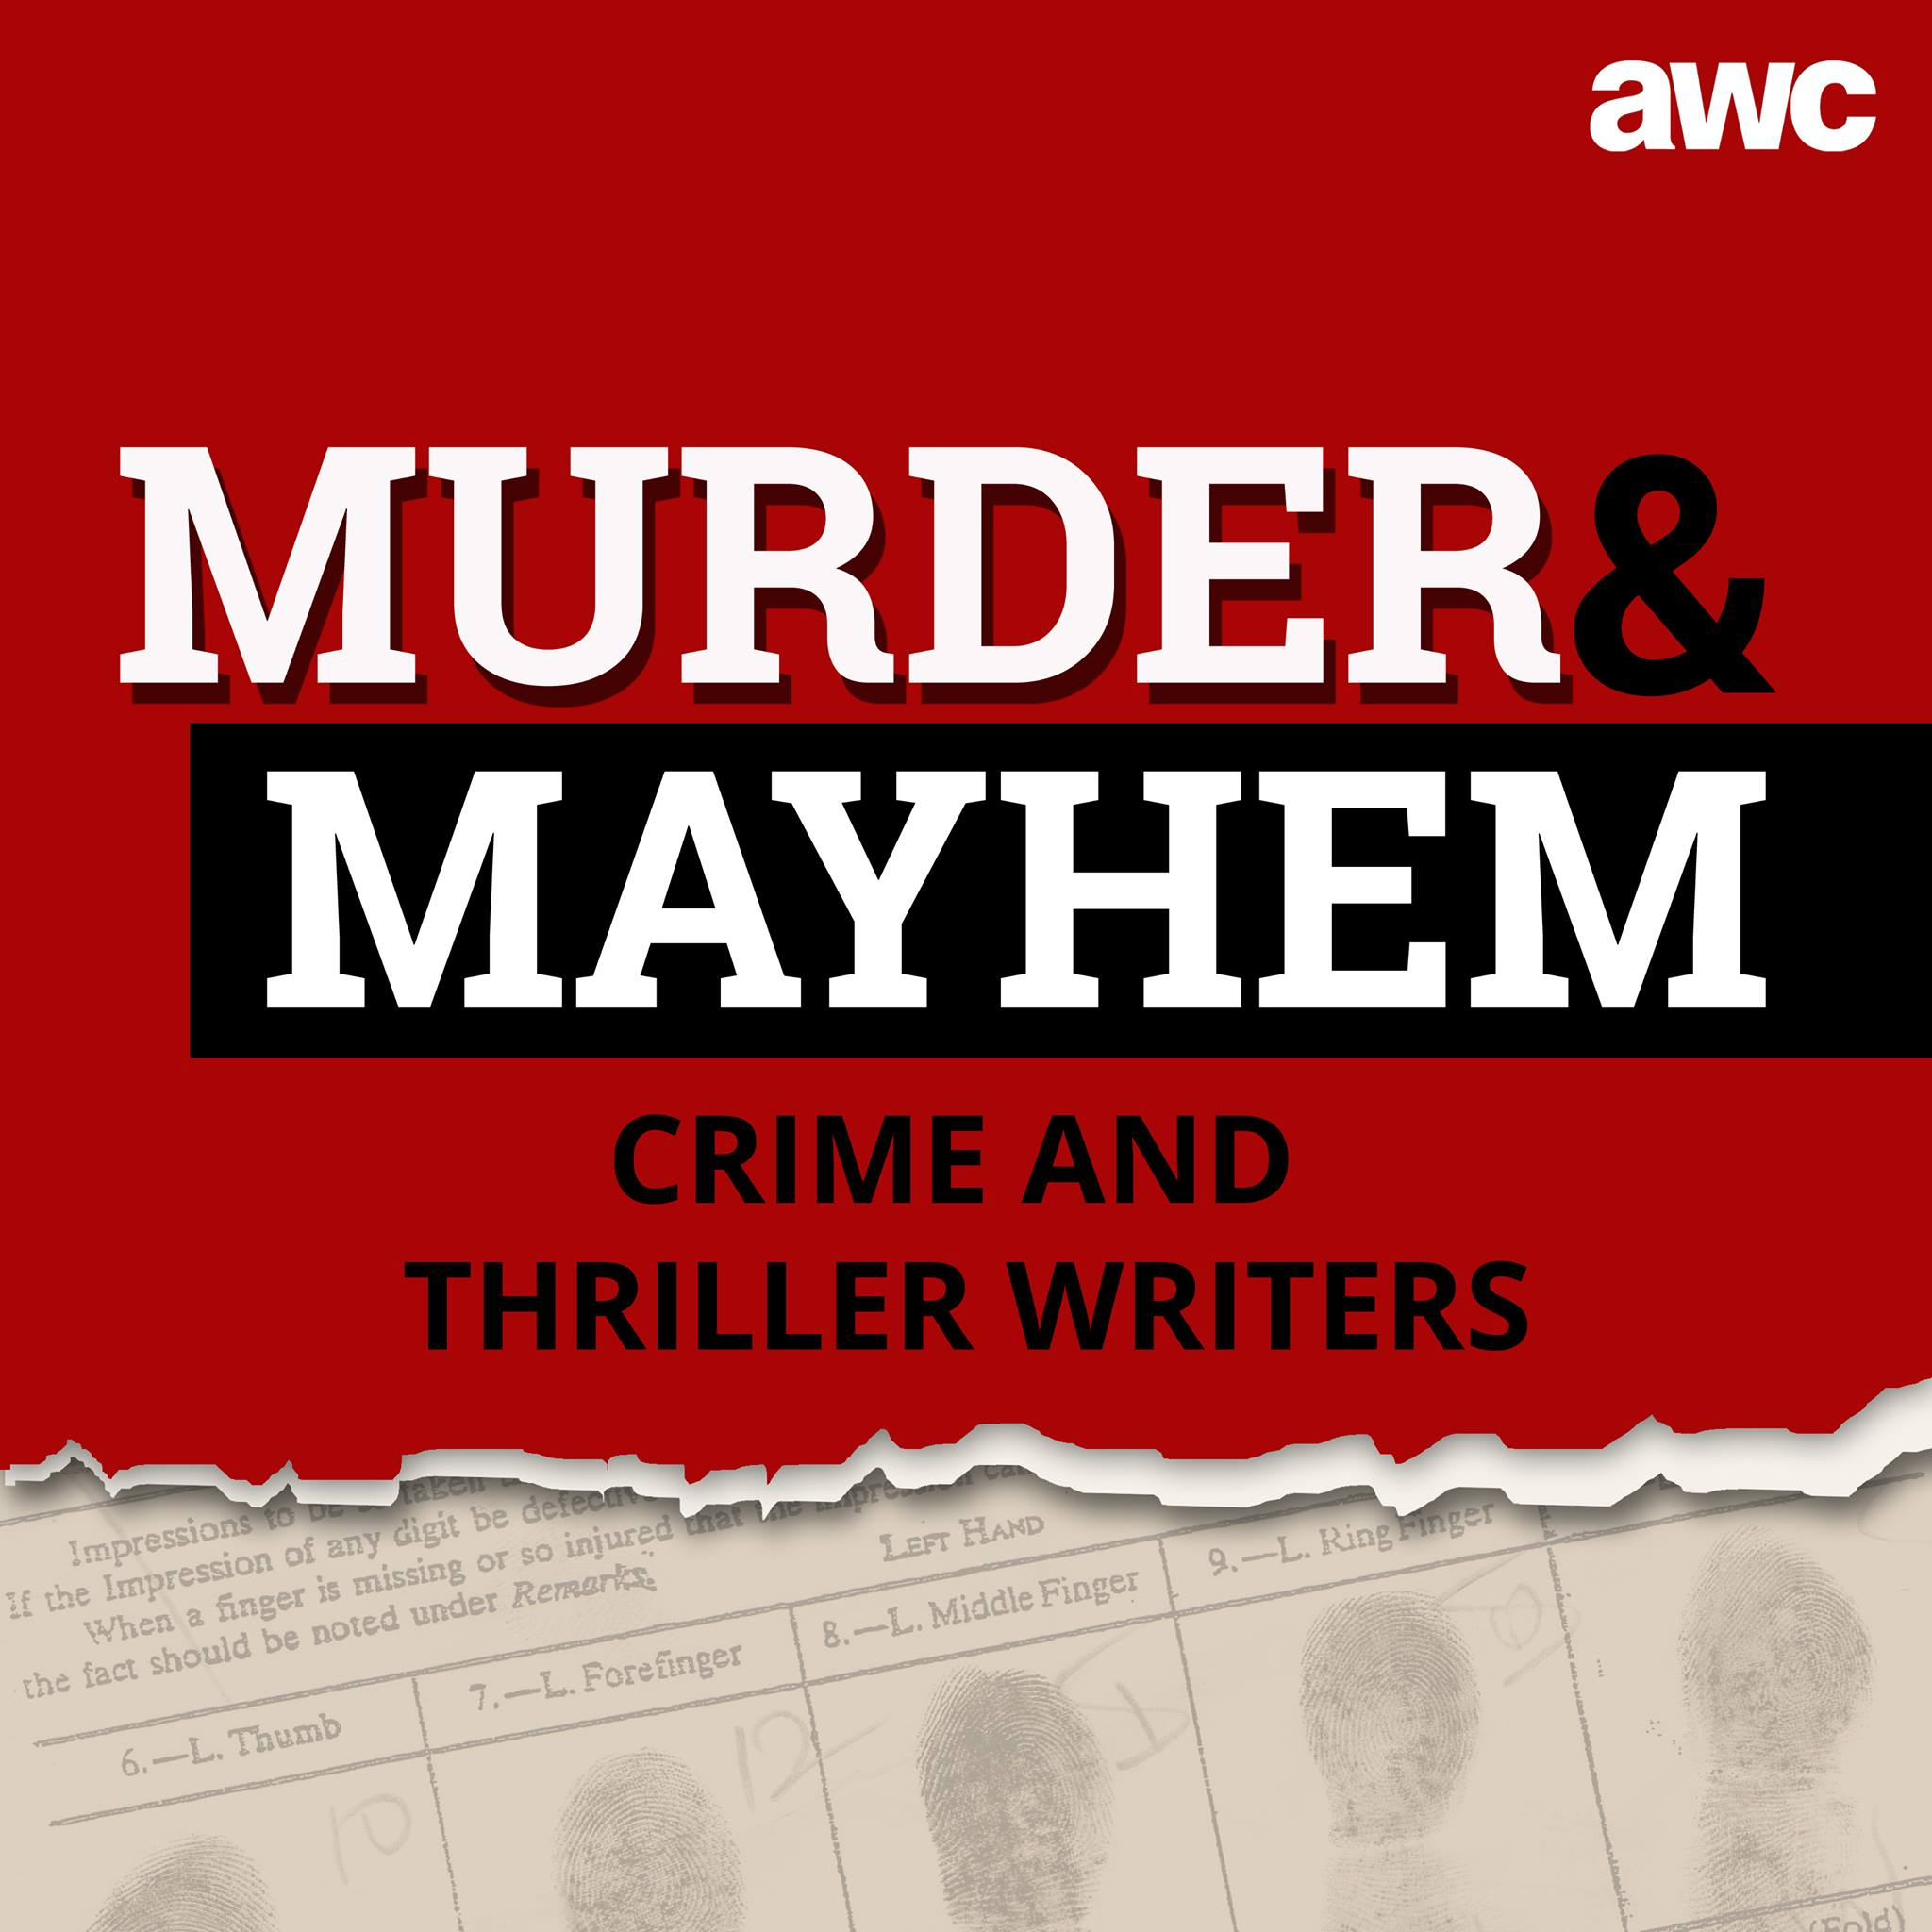 MURDER MAYHEM 24: Sydney Bauer worked in TV before moving on to become an author.